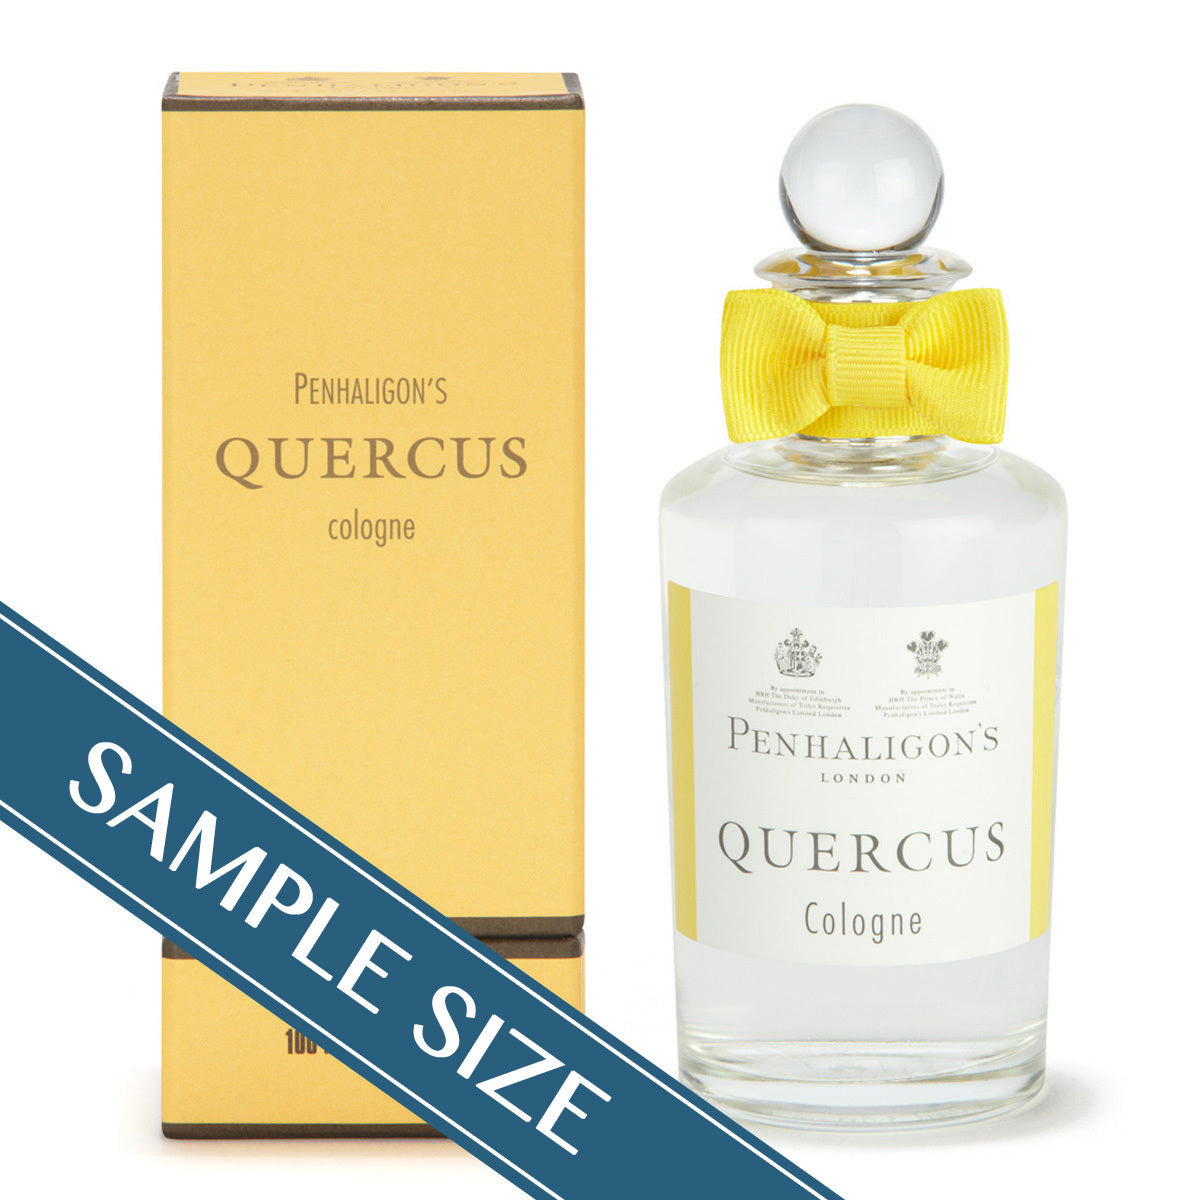 Primary image of Sample - Quercus Cologne